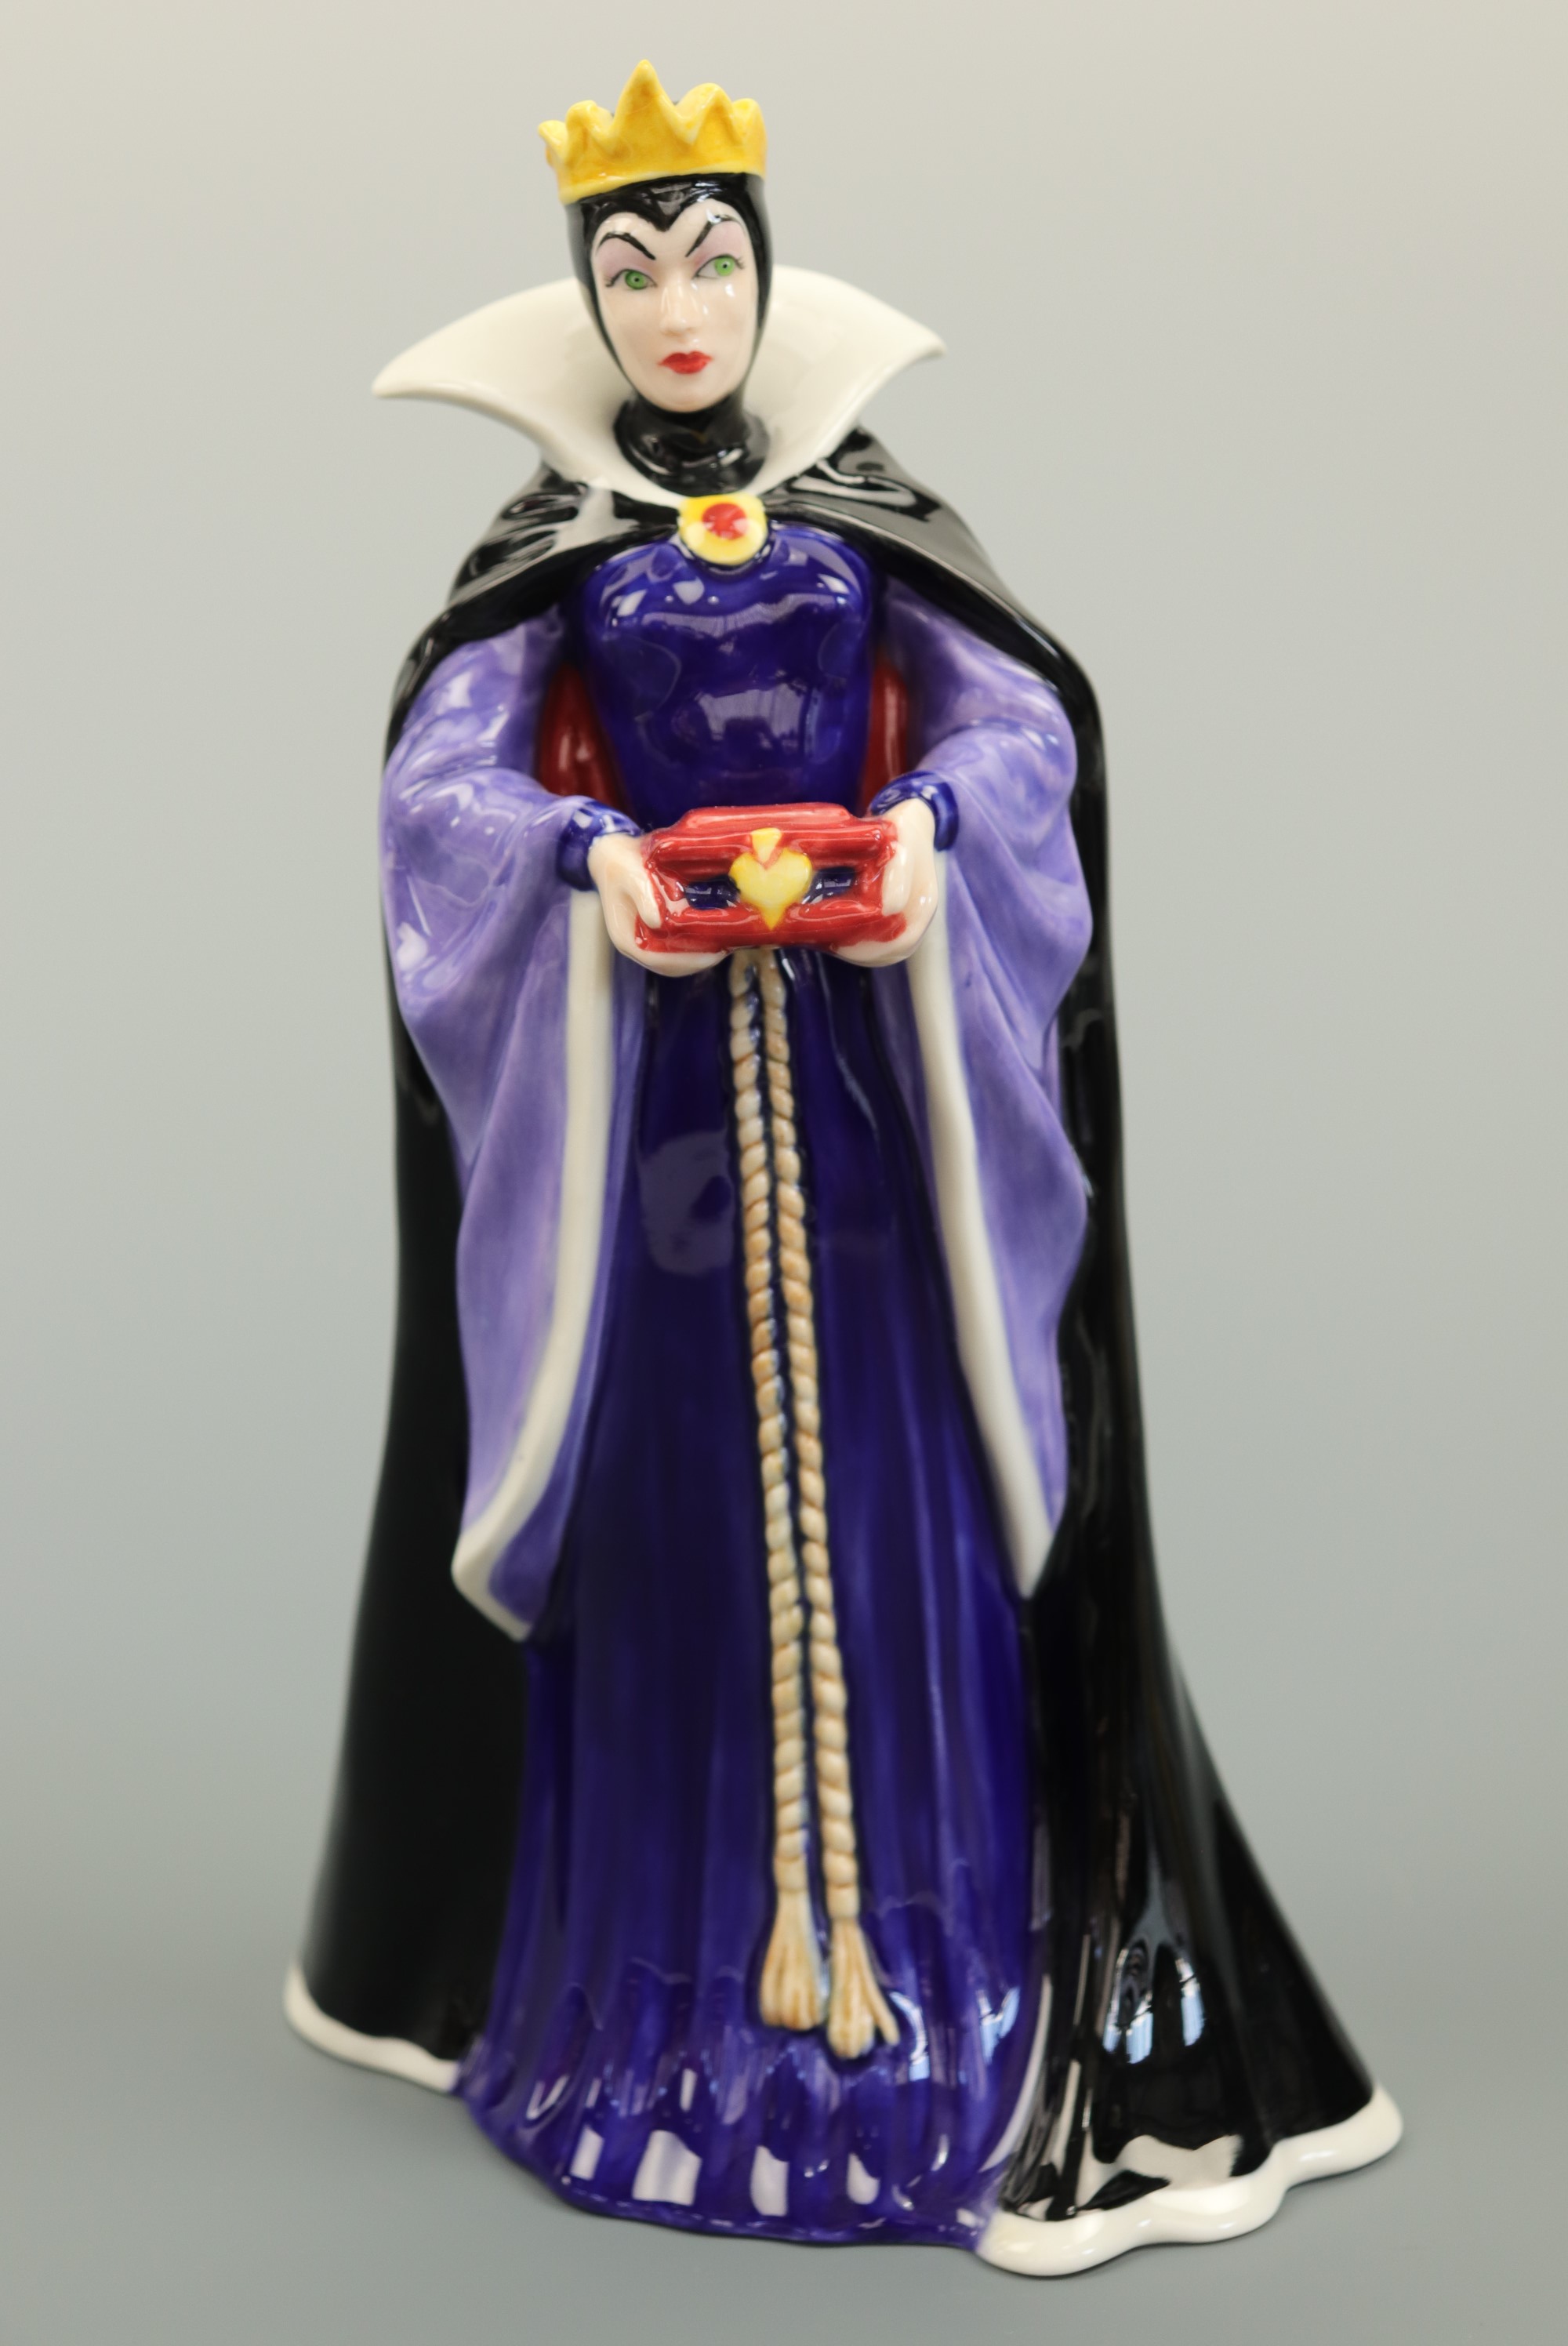 A Limited Edition Royal Doulton figurine from the Disney Villains Collection; 'The Queen from Walt